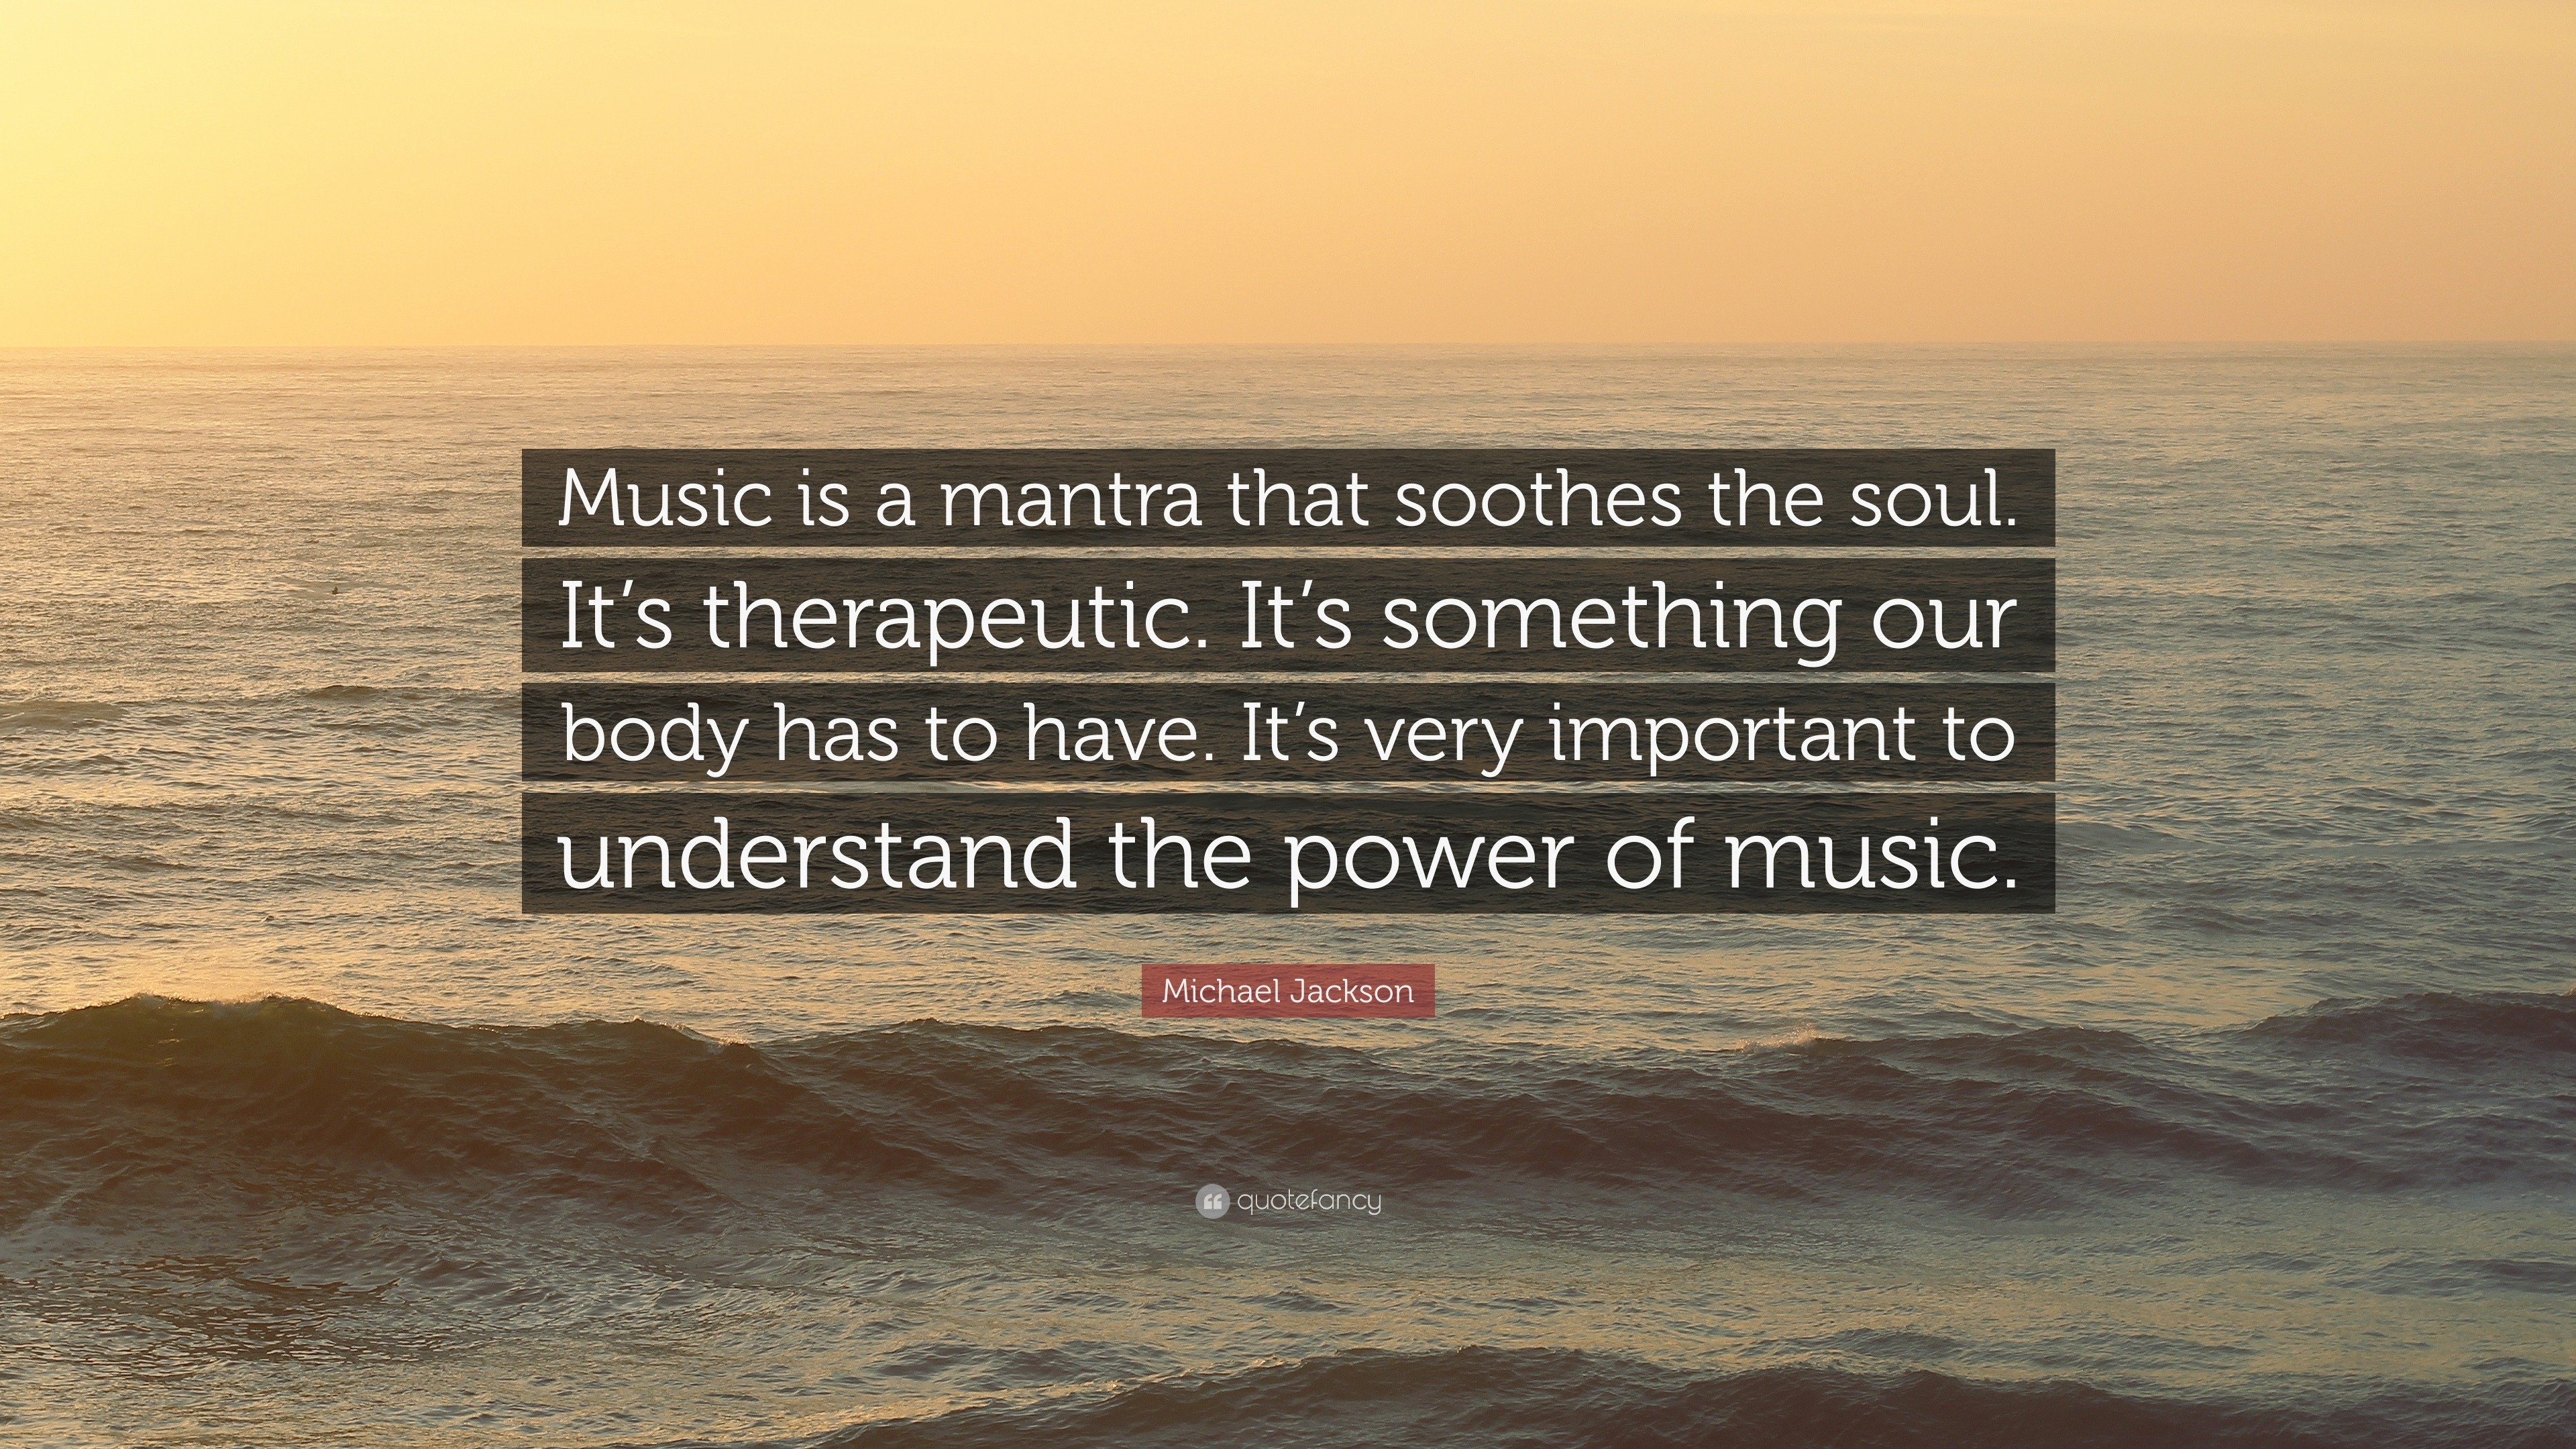 Michael Jackson Quote: “Music is a mantra that soothes the soul. It’s